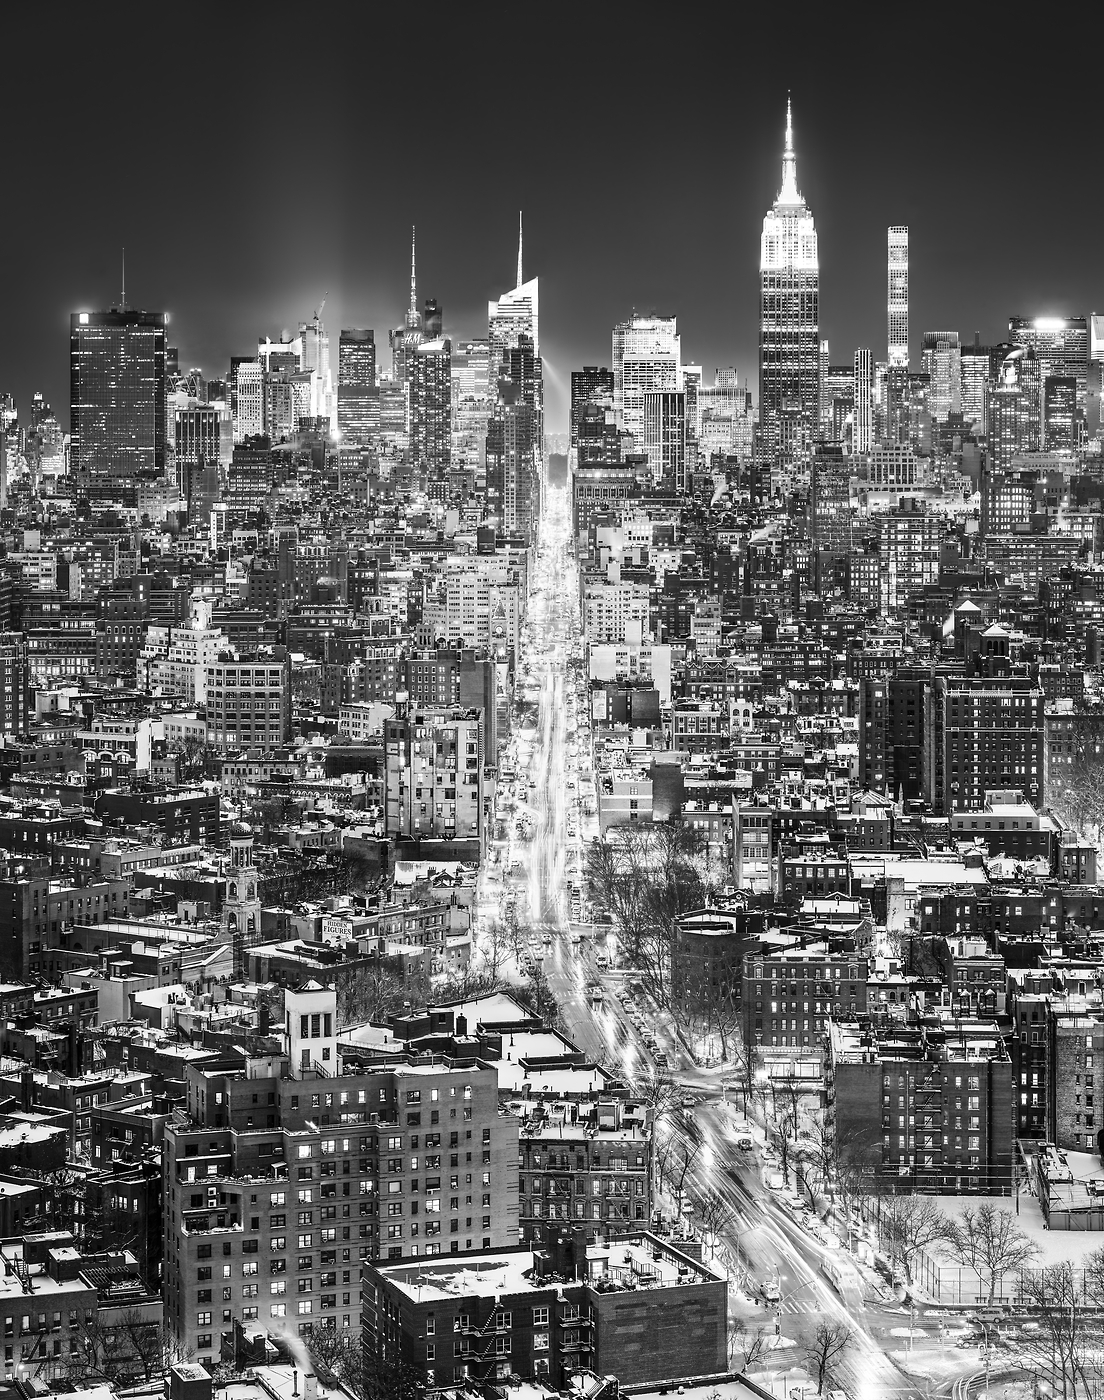 1,571 megapixels! A very high resolution, large-format VAST photo print of the Manhattan NYC skyline in winter snow at night; black and white cityscape fine art photo created by Dan Piech in New York City